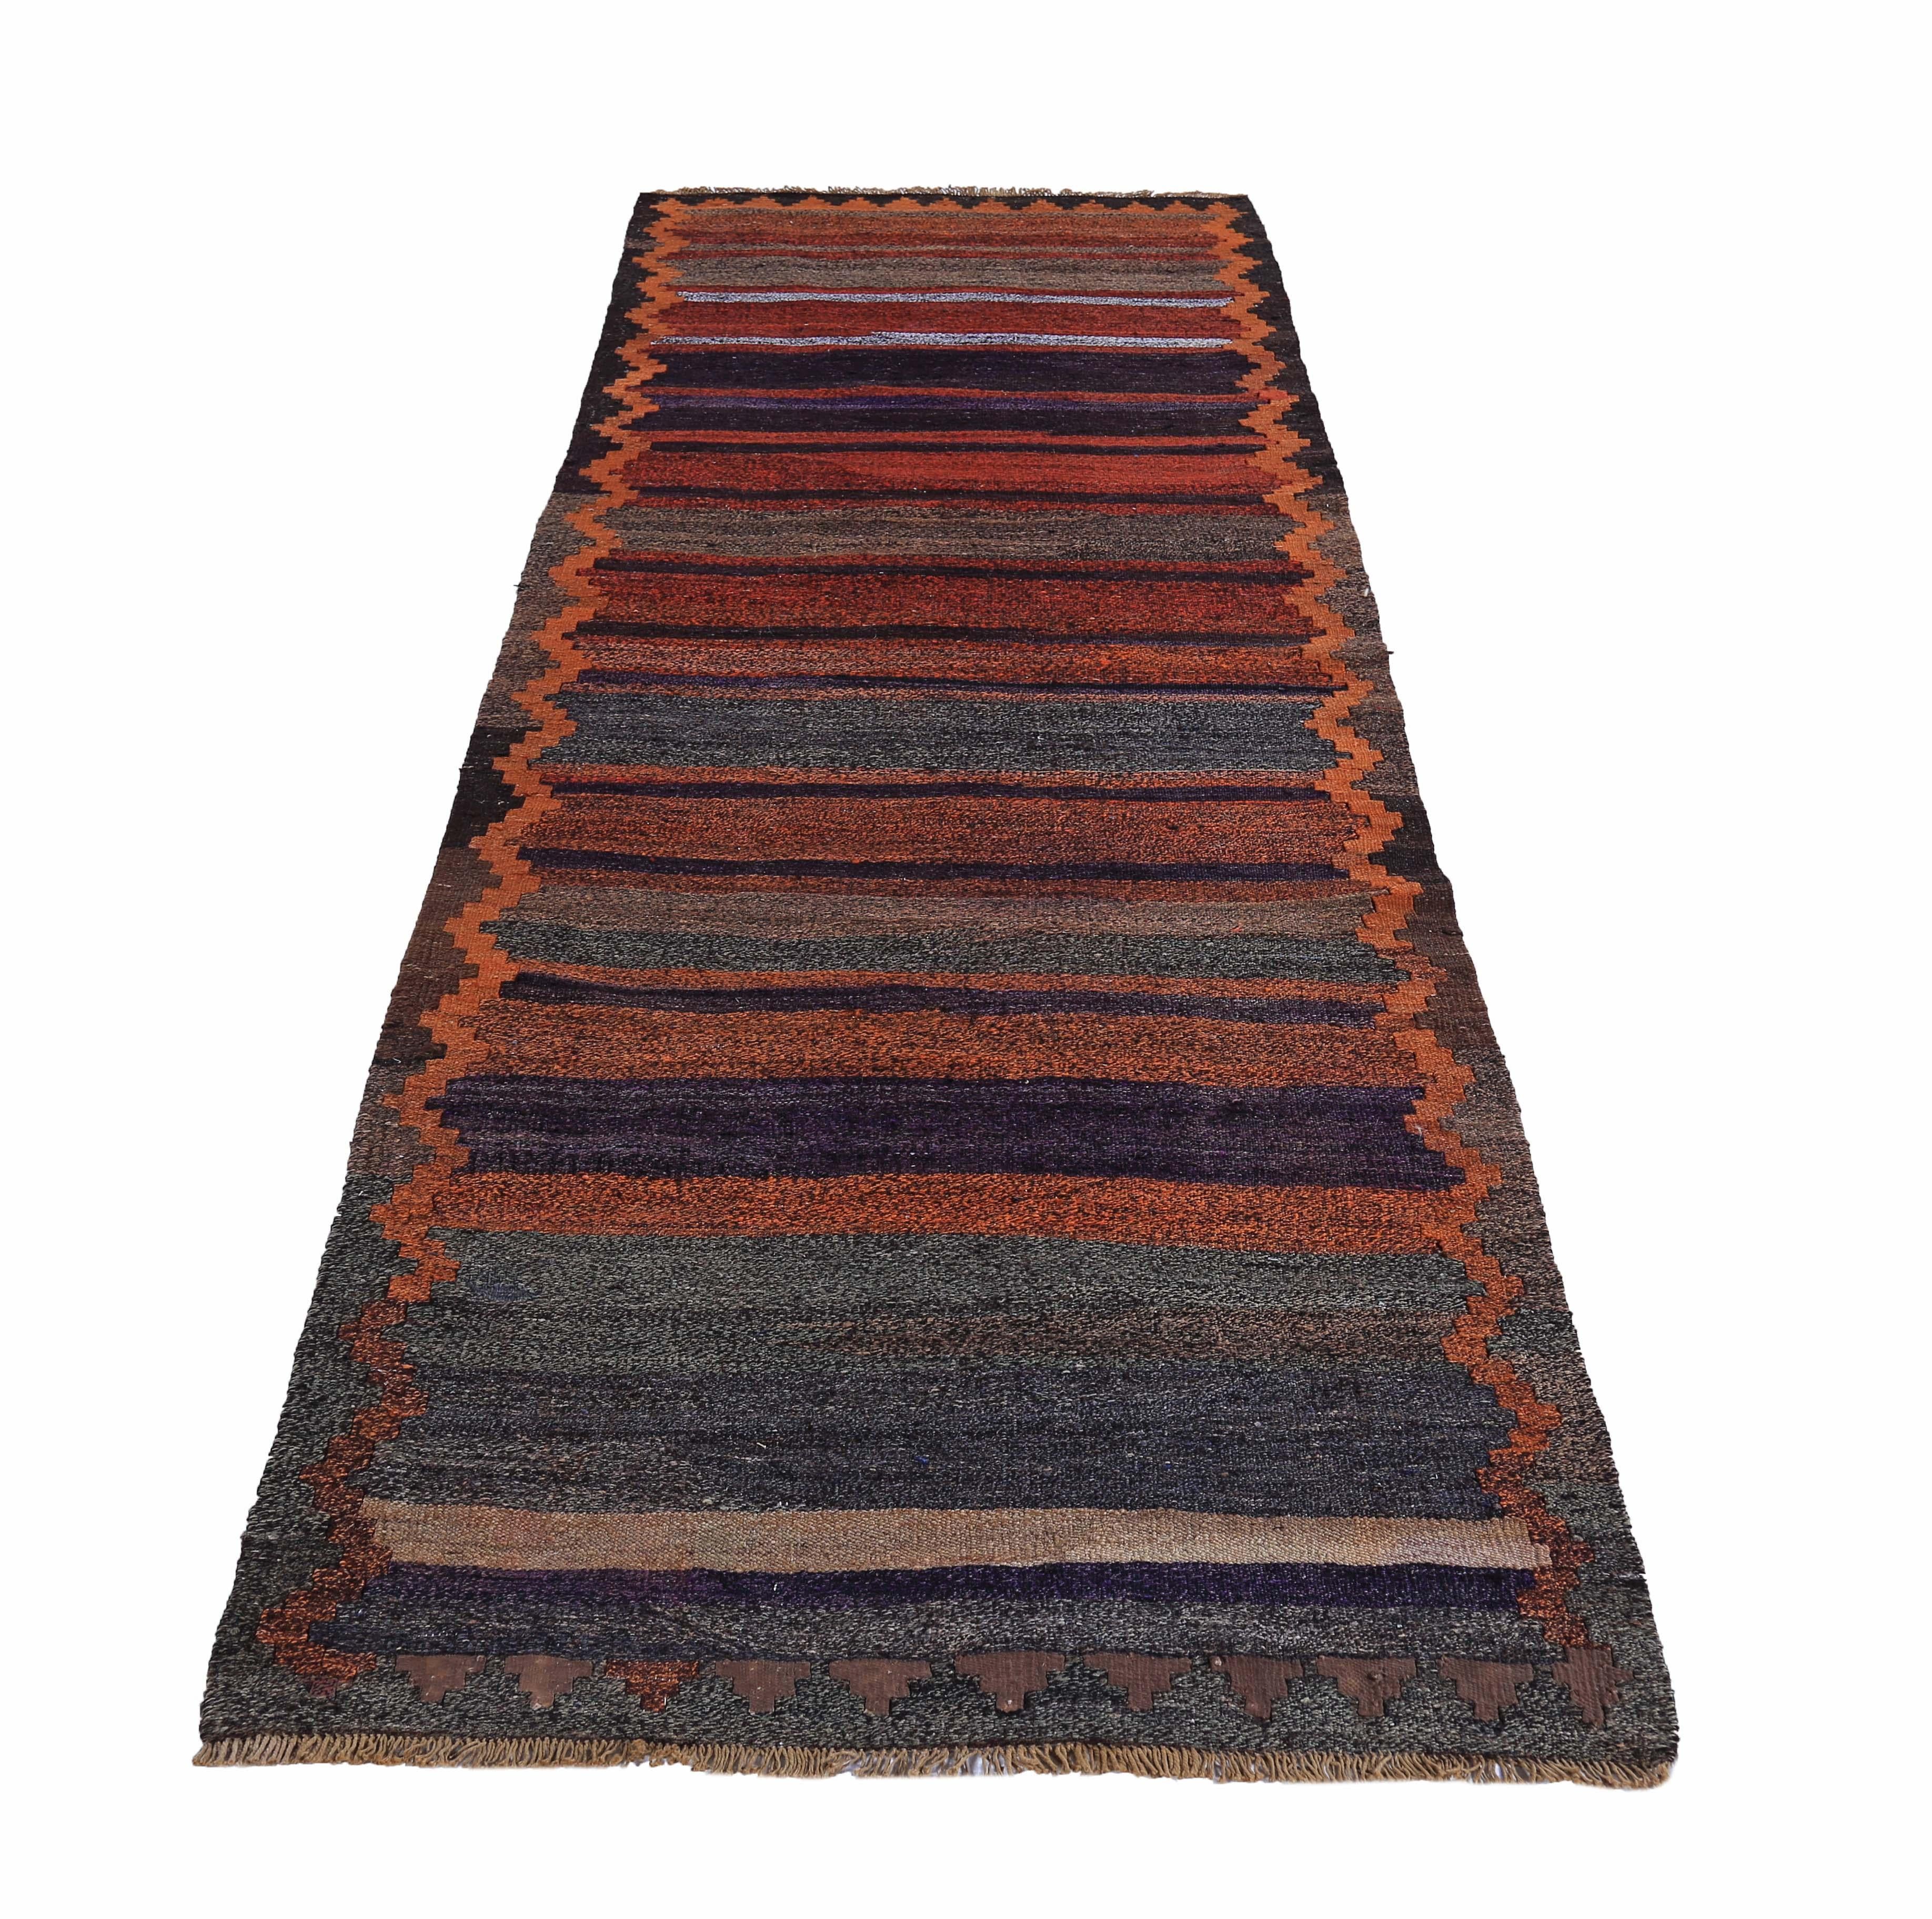 Turkish runner rug handwoven from the finest sheep’s wool and colored with all-natural vegetable dyes that are safe for humans and pets. It’s a traditional Kilim flat-weave design featuring orange, navy and red stripes with tribal patterns. It’s a